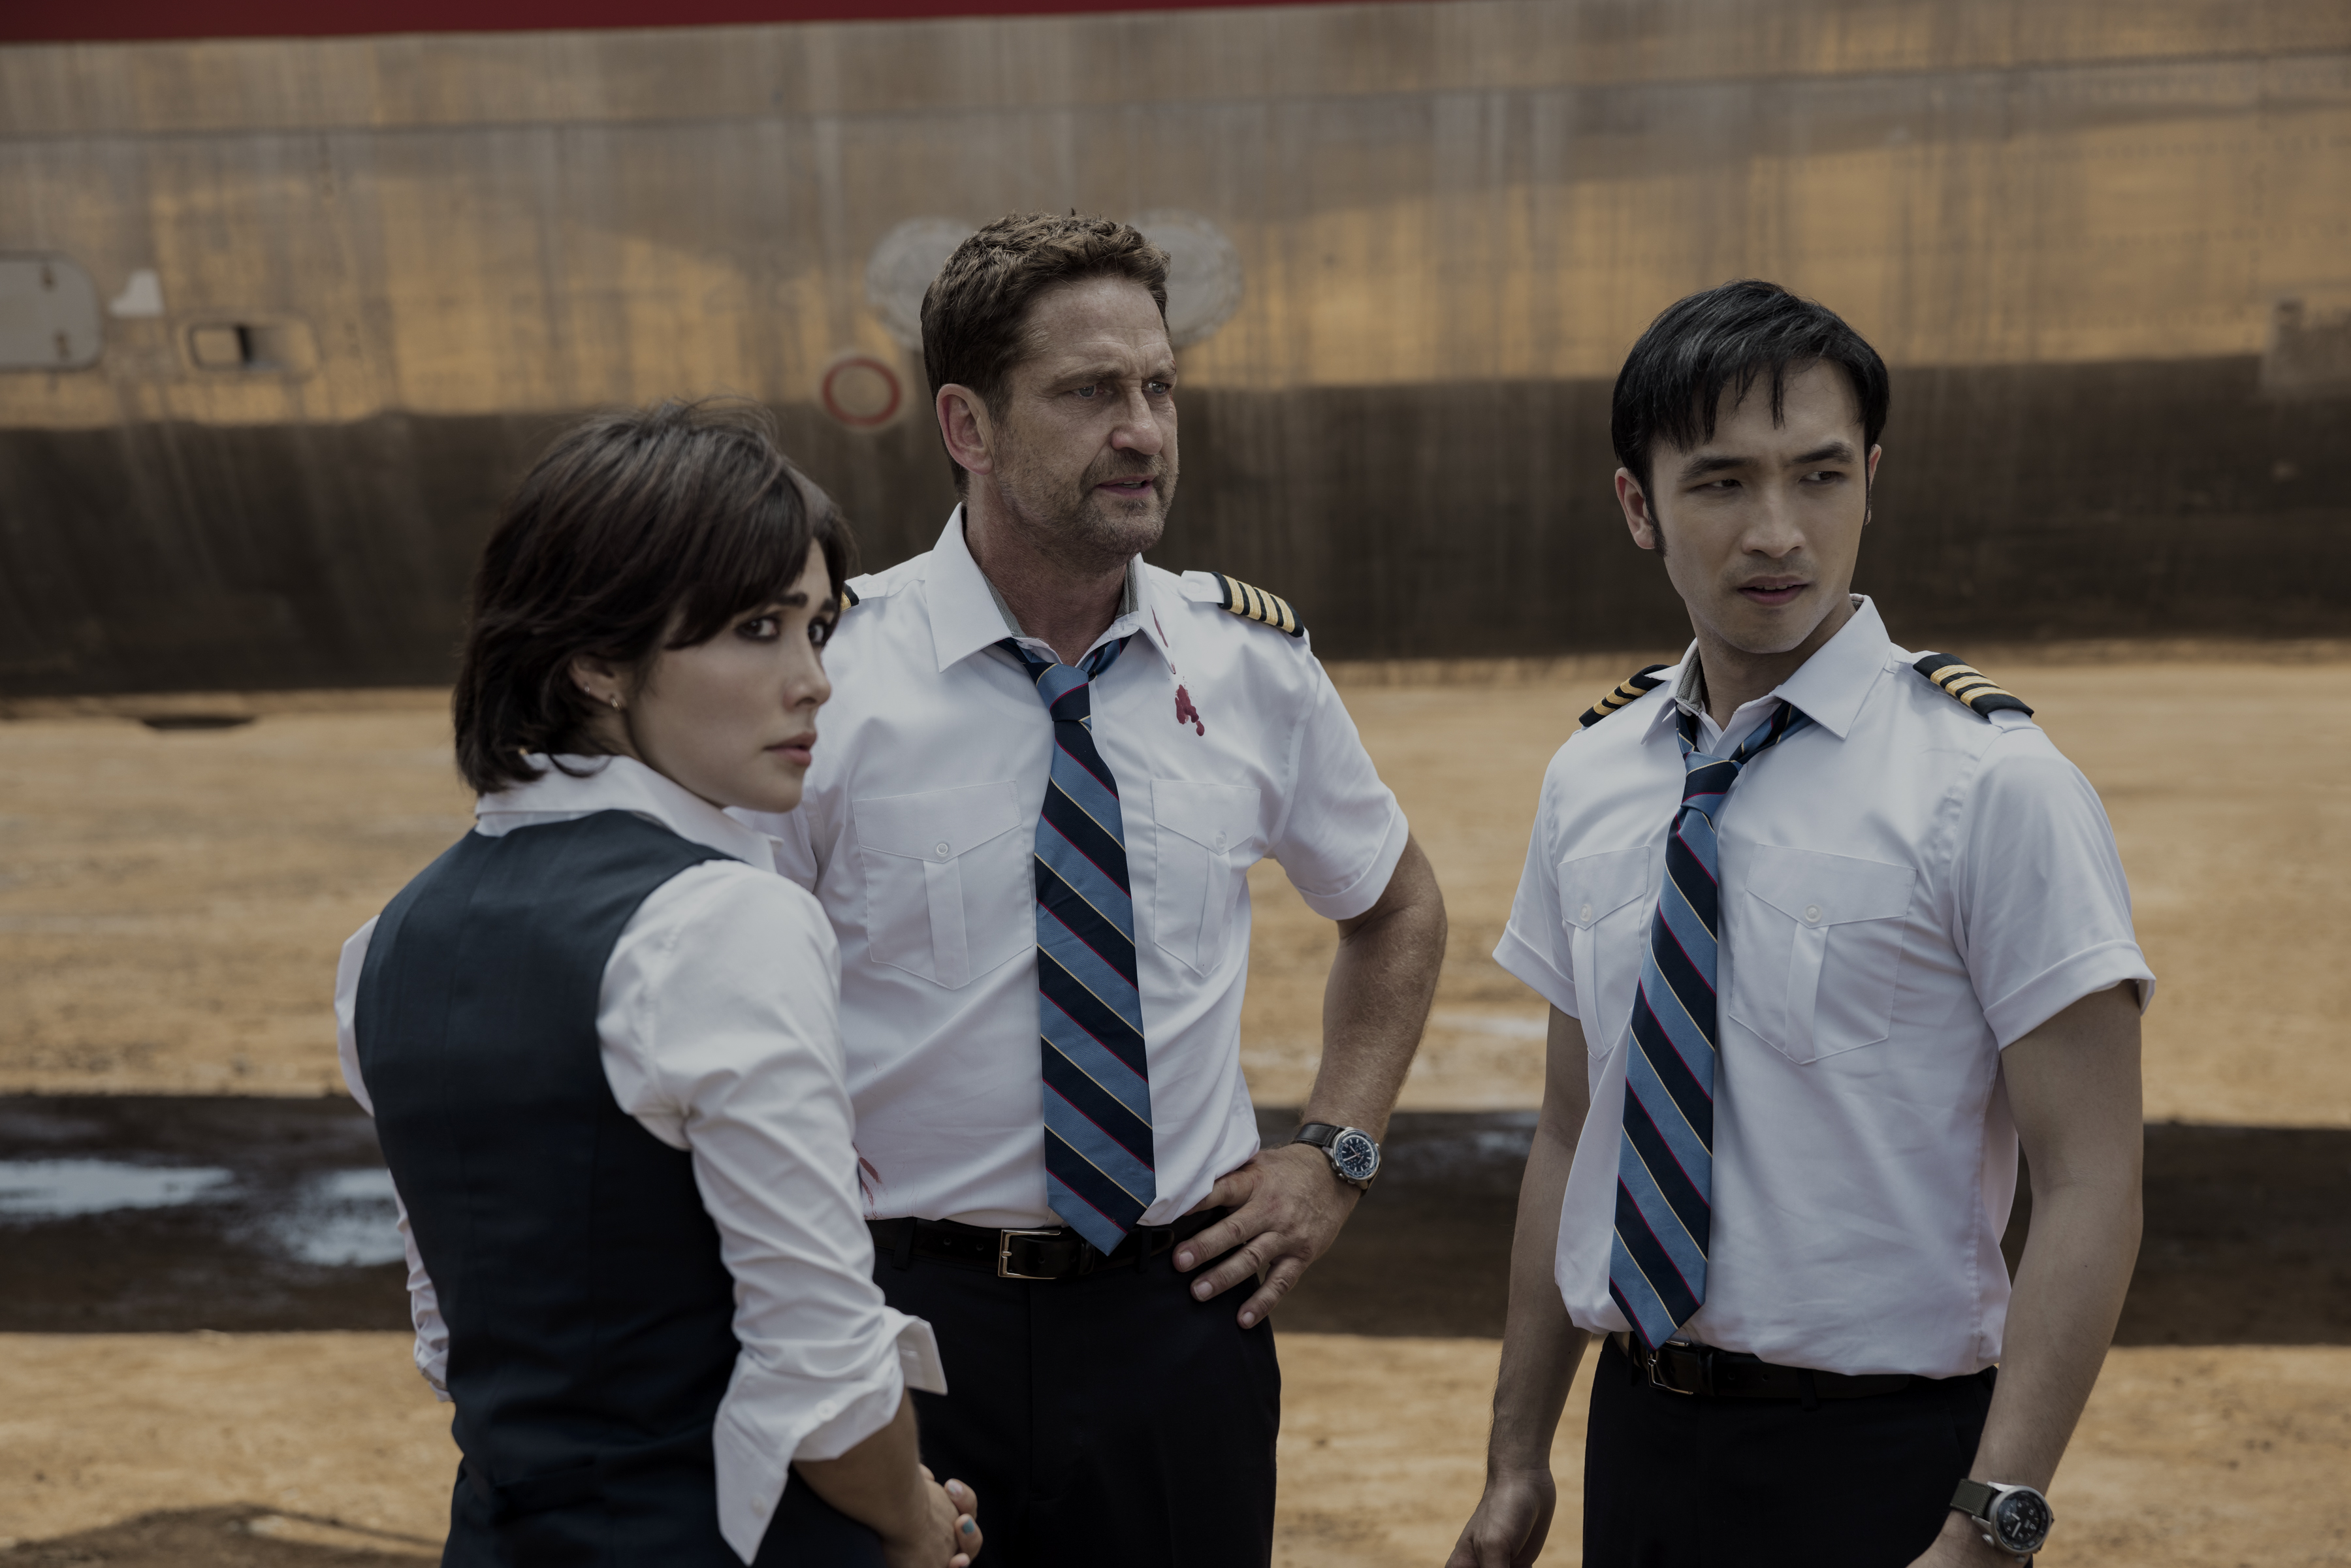 Review: Gerard Butler sticks the landing in ridiculously sublime thriller Plane Globe and Mail